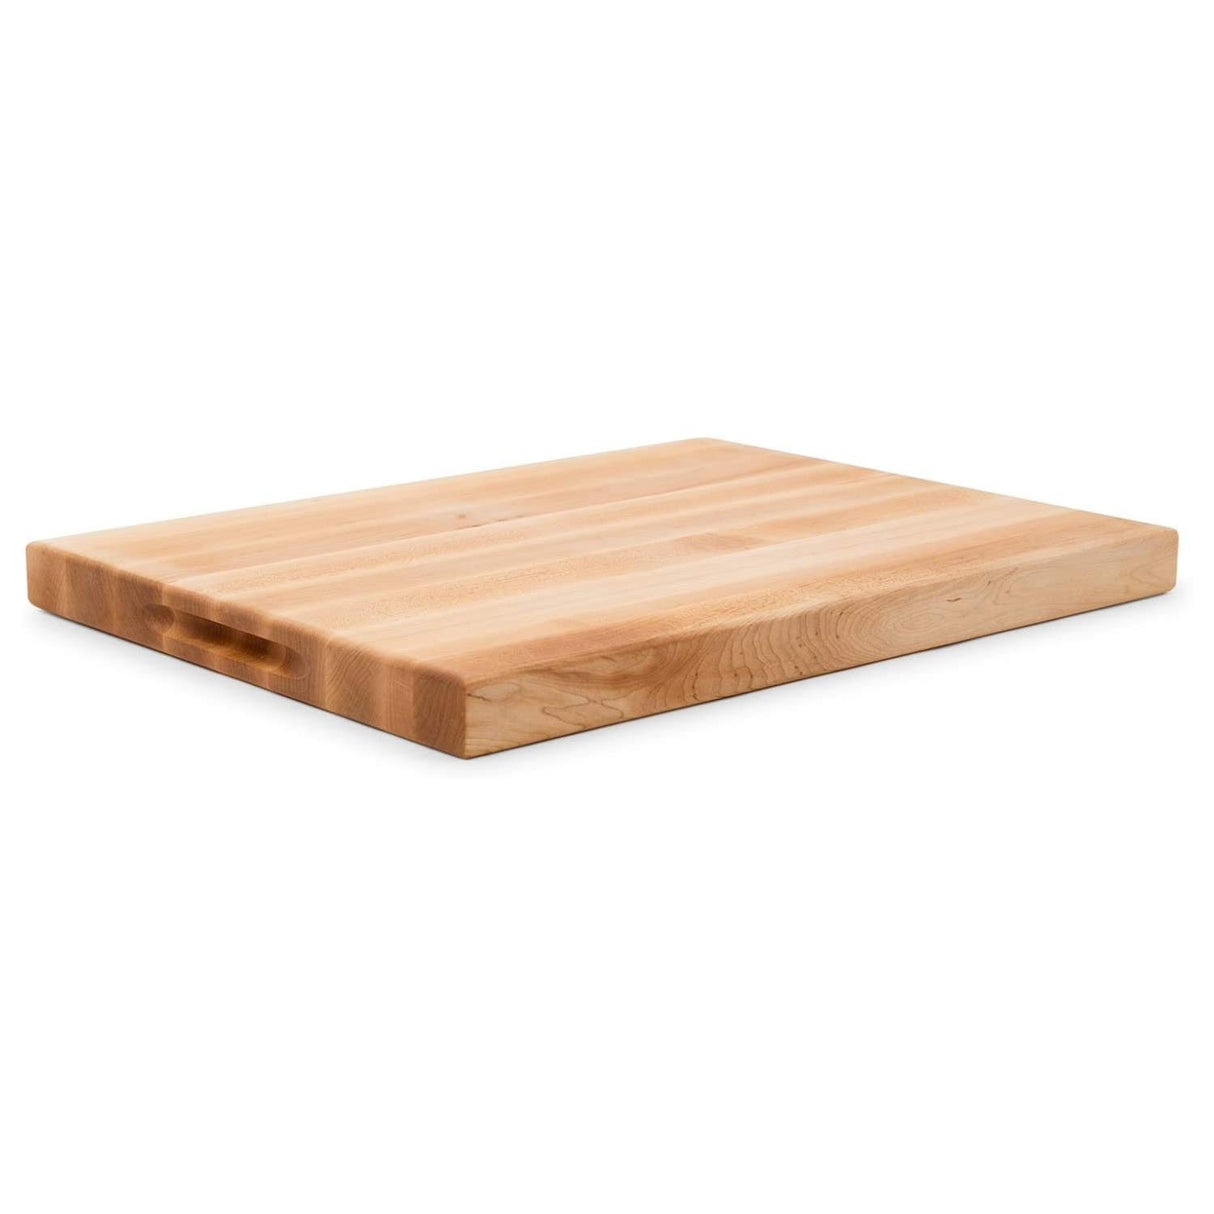 John Boos CB1054-1M2015150 Maple Wood Cutting Board for Kitchen Prep, 20 x 15 Inches, 1.5 Inches Thick Edge Grain Reversible Charcuterie Block with Juice Groove 20X15X1.5 MPL-EDGE GR-REV-